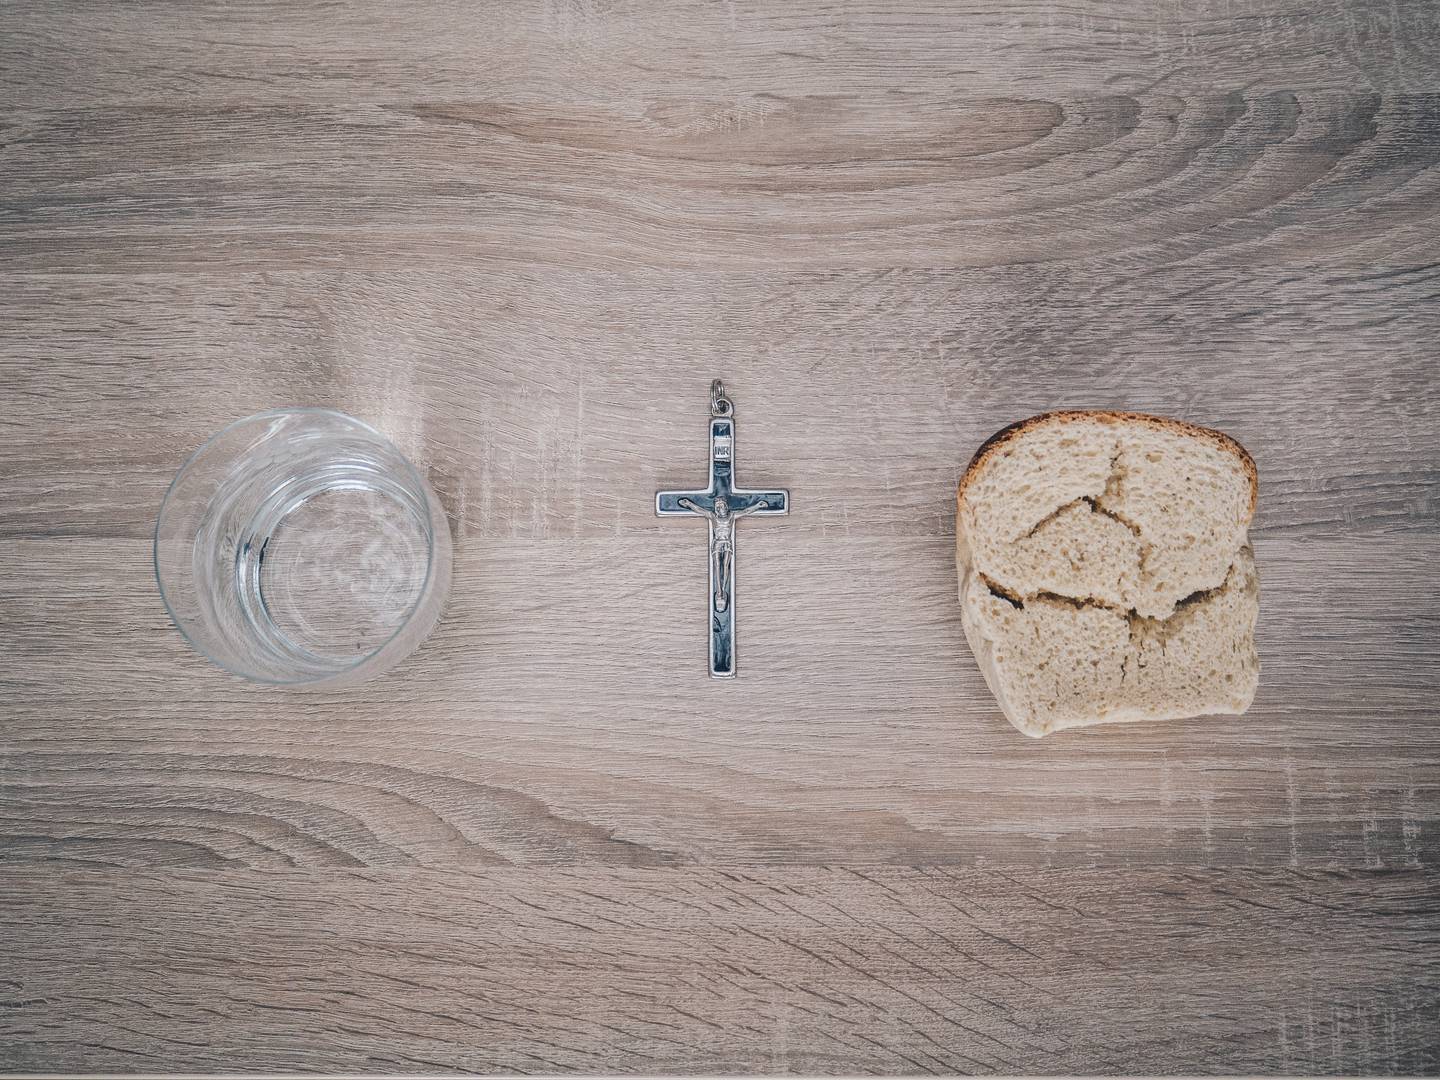 Observers usually abstain from pleasures and luxuries during Lent and may eat simpler foods, while enjoying a period of self-reflection. Photo: Unsplash